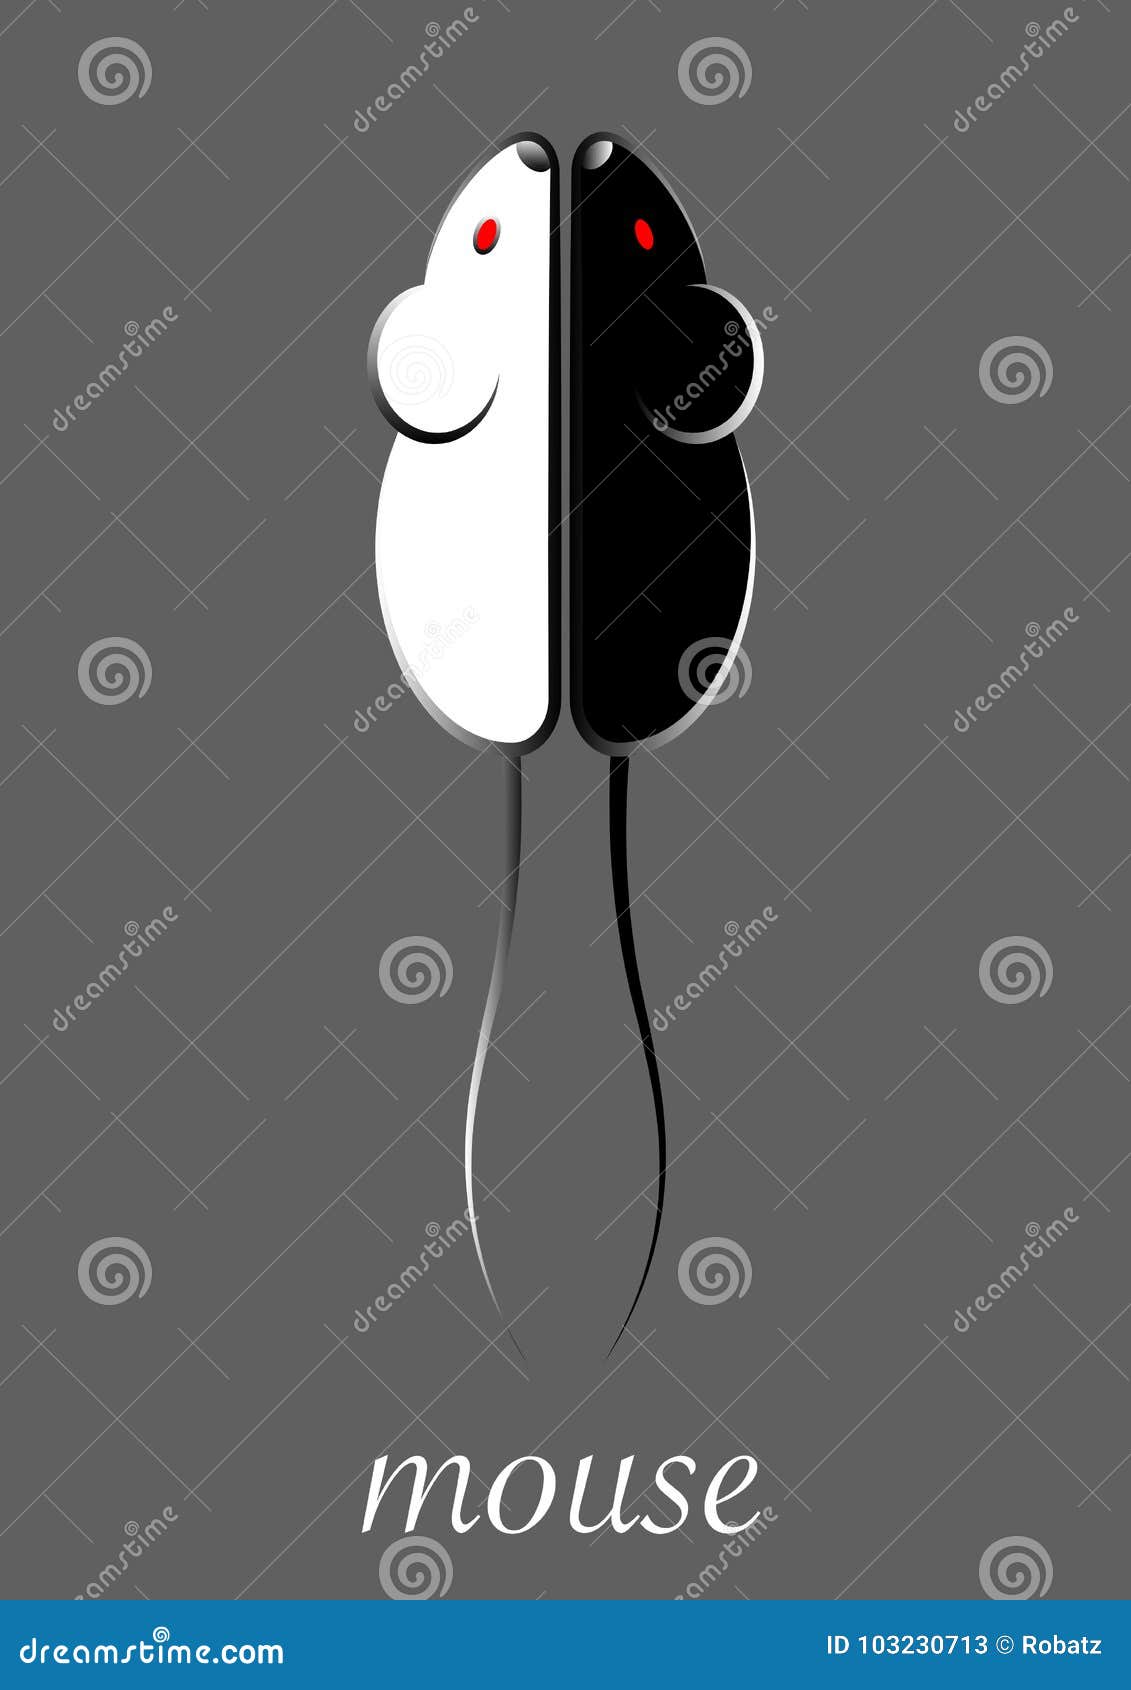 stylish icon of a black and white mouse icone for web and print. minimalistic  of the home of a rodent mouse or rat,